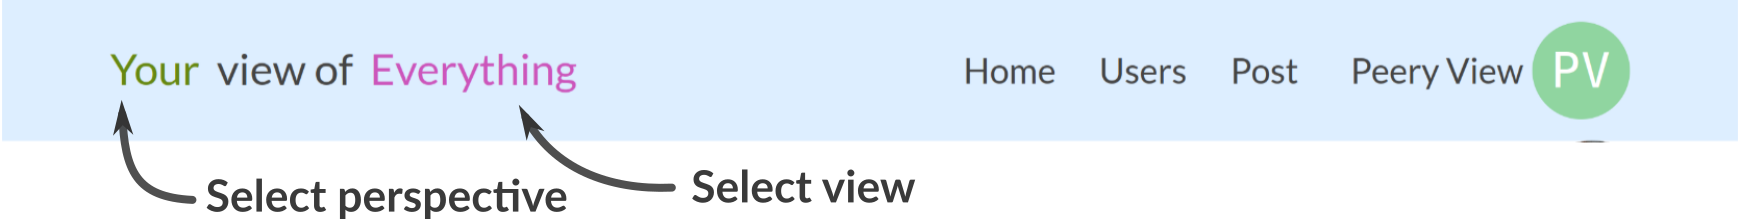 The view selection header.